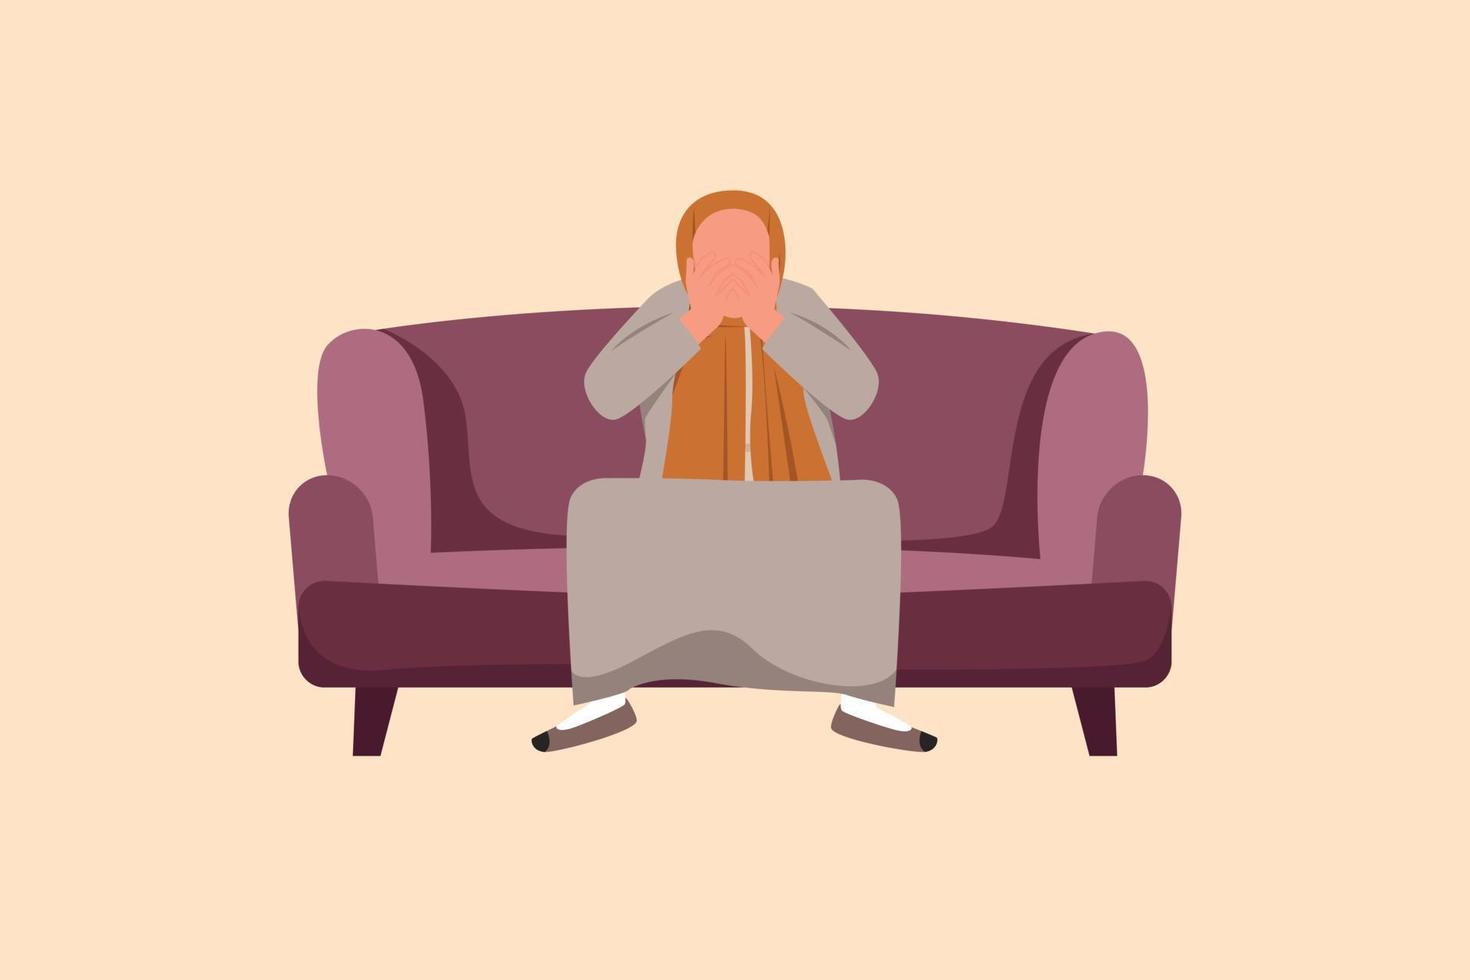 Business design drawing depressed Arab businesswoman sitting on sofa and holding head. Lonely female sitting on couch. Losing job due to economic finance crisis. Flat cartoon style vector illustration